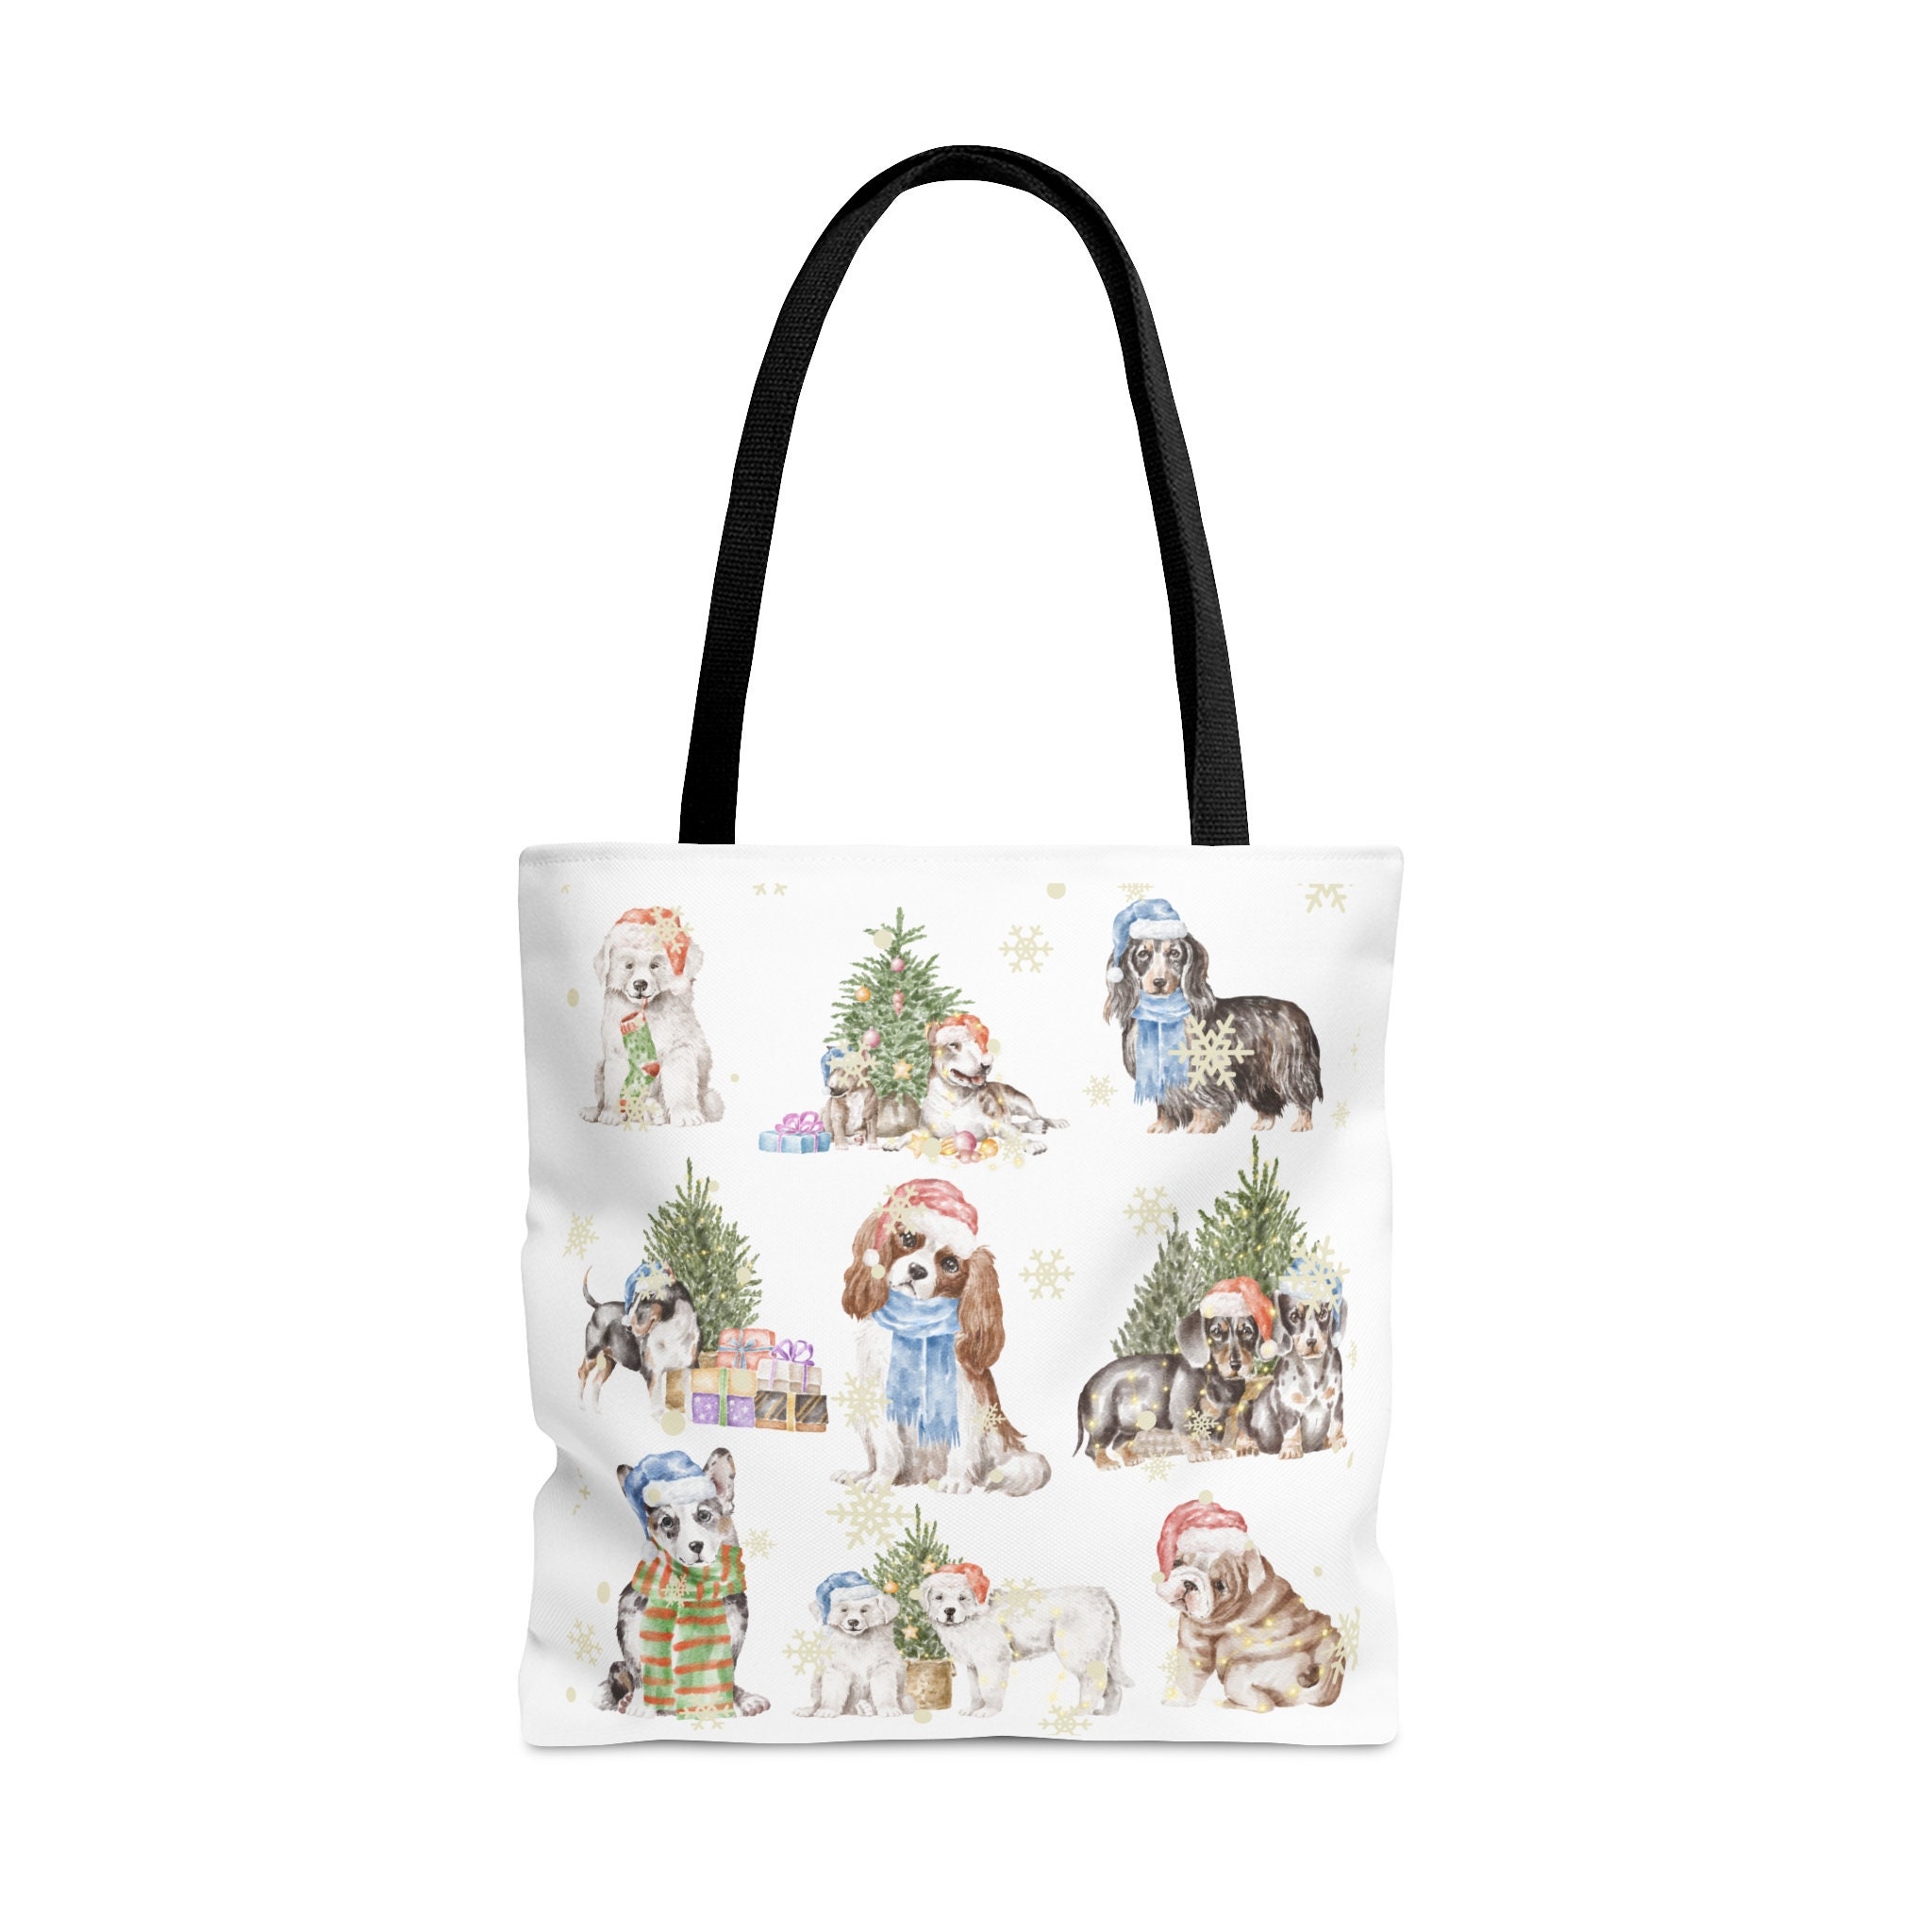 Flower/cat/dog Canvas Tote Bag, Kitten Handbag, Small Carry Bags With  Zipper, Reusable Grocery Tote, Winter Bags, Valentines Gifts 